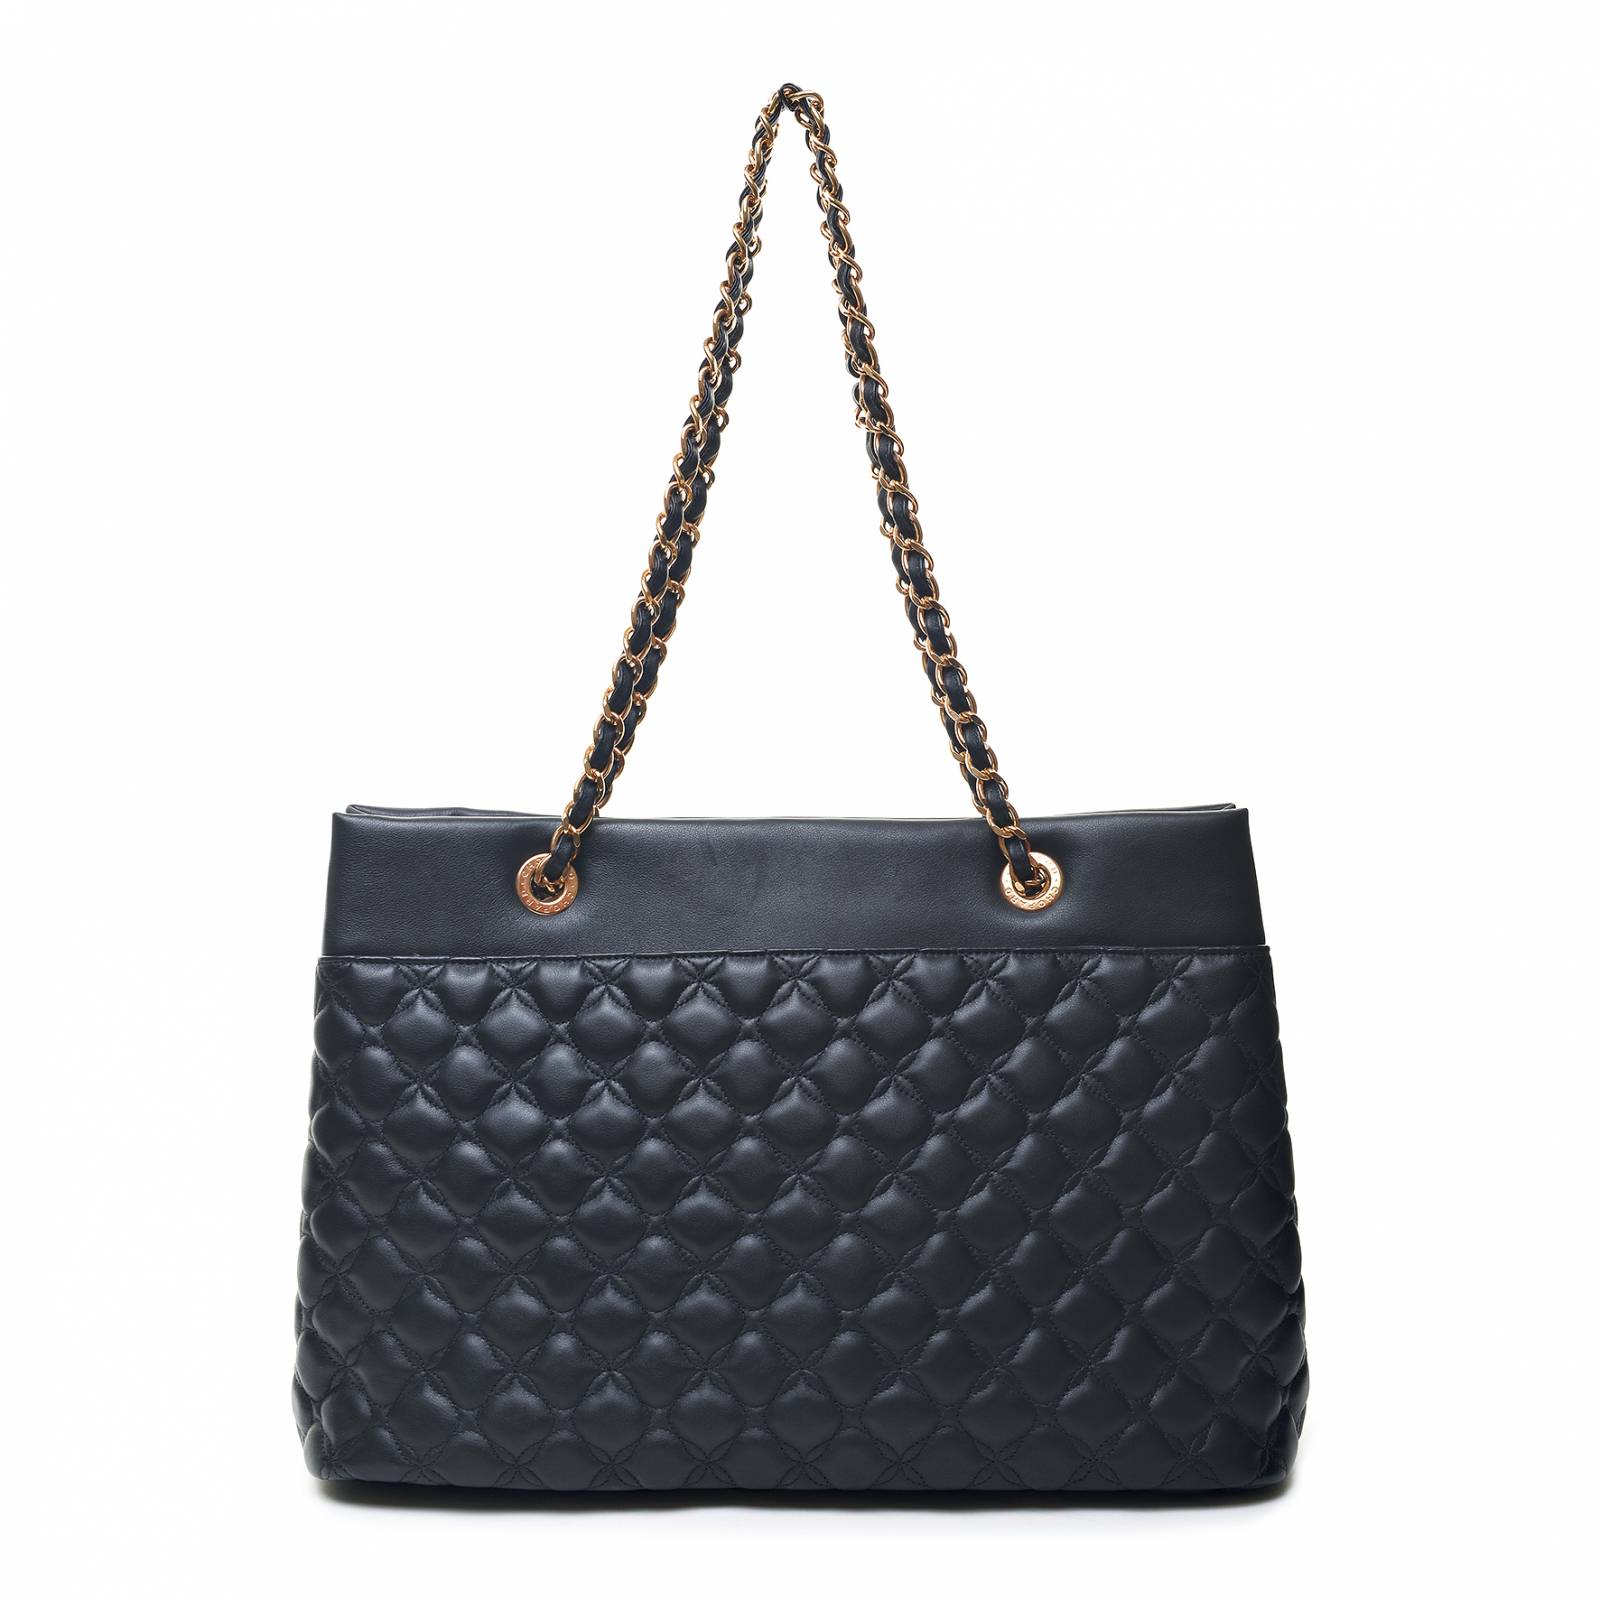 All day imperiale handbag